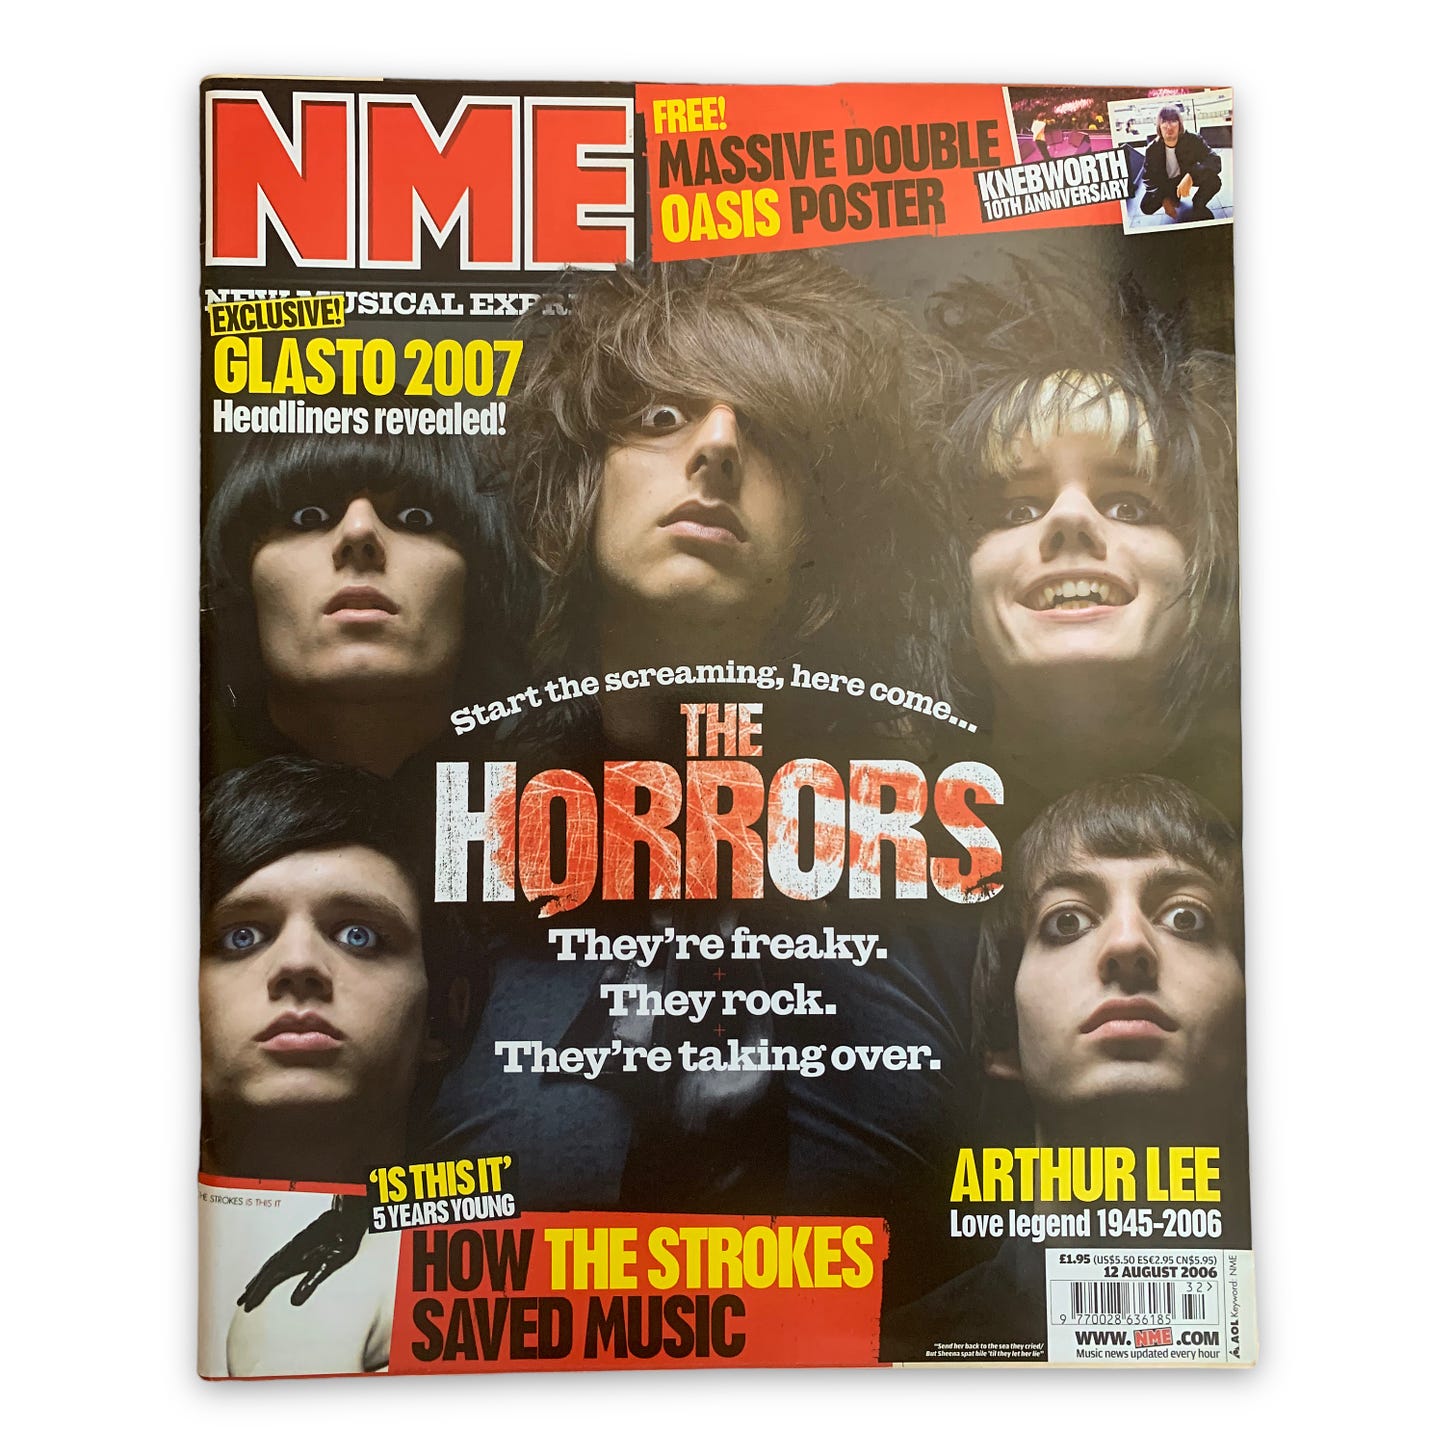 NME 12 August 2006 featuring The Horrors on the cover available from  Limitless Collectables.